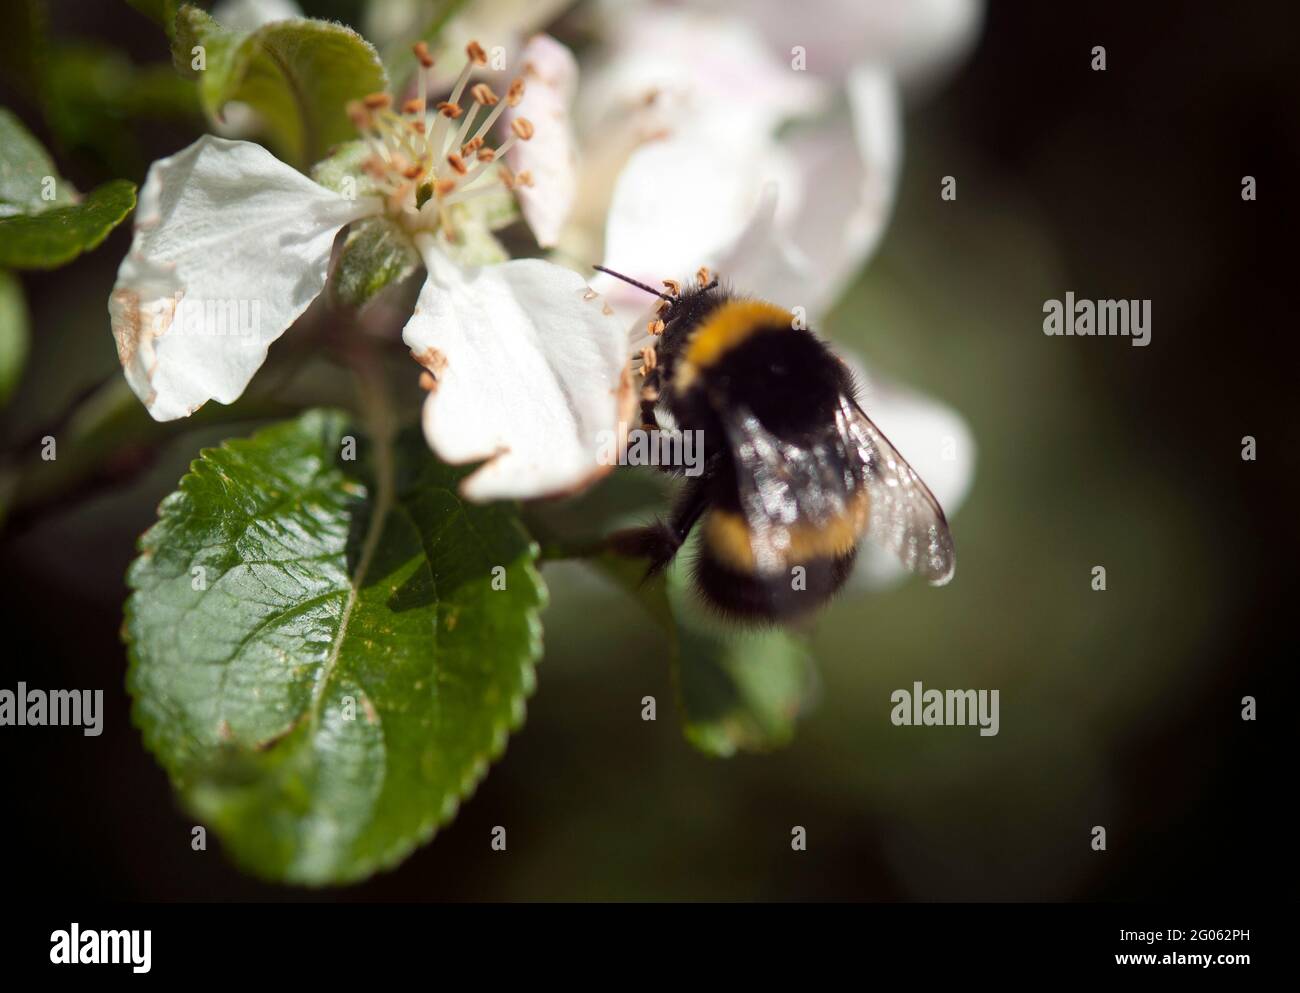 A bee collecting pollen in a flower, Kilbrannish South, County Carlow, south east Ireland, Europe Stock Photo